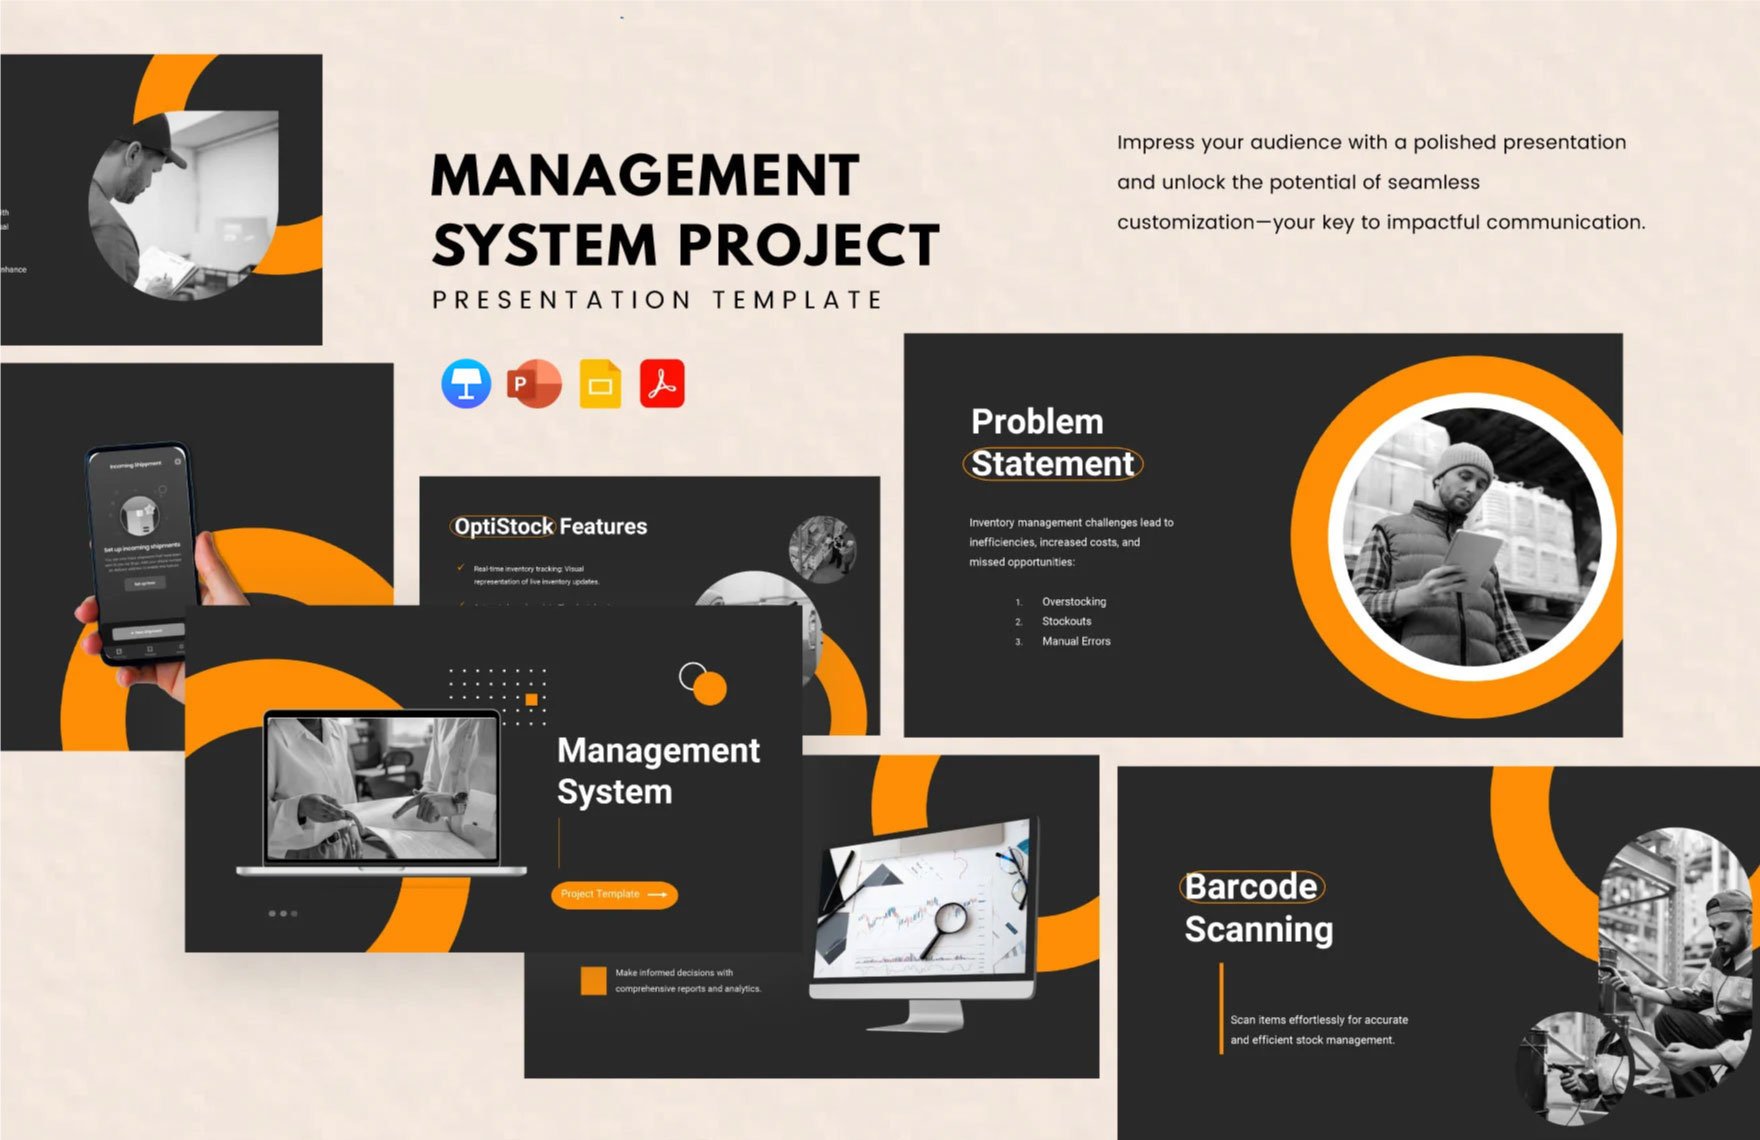 Management System Project Template in PDF, PowerPoint, Google Slides, Apple Keynote